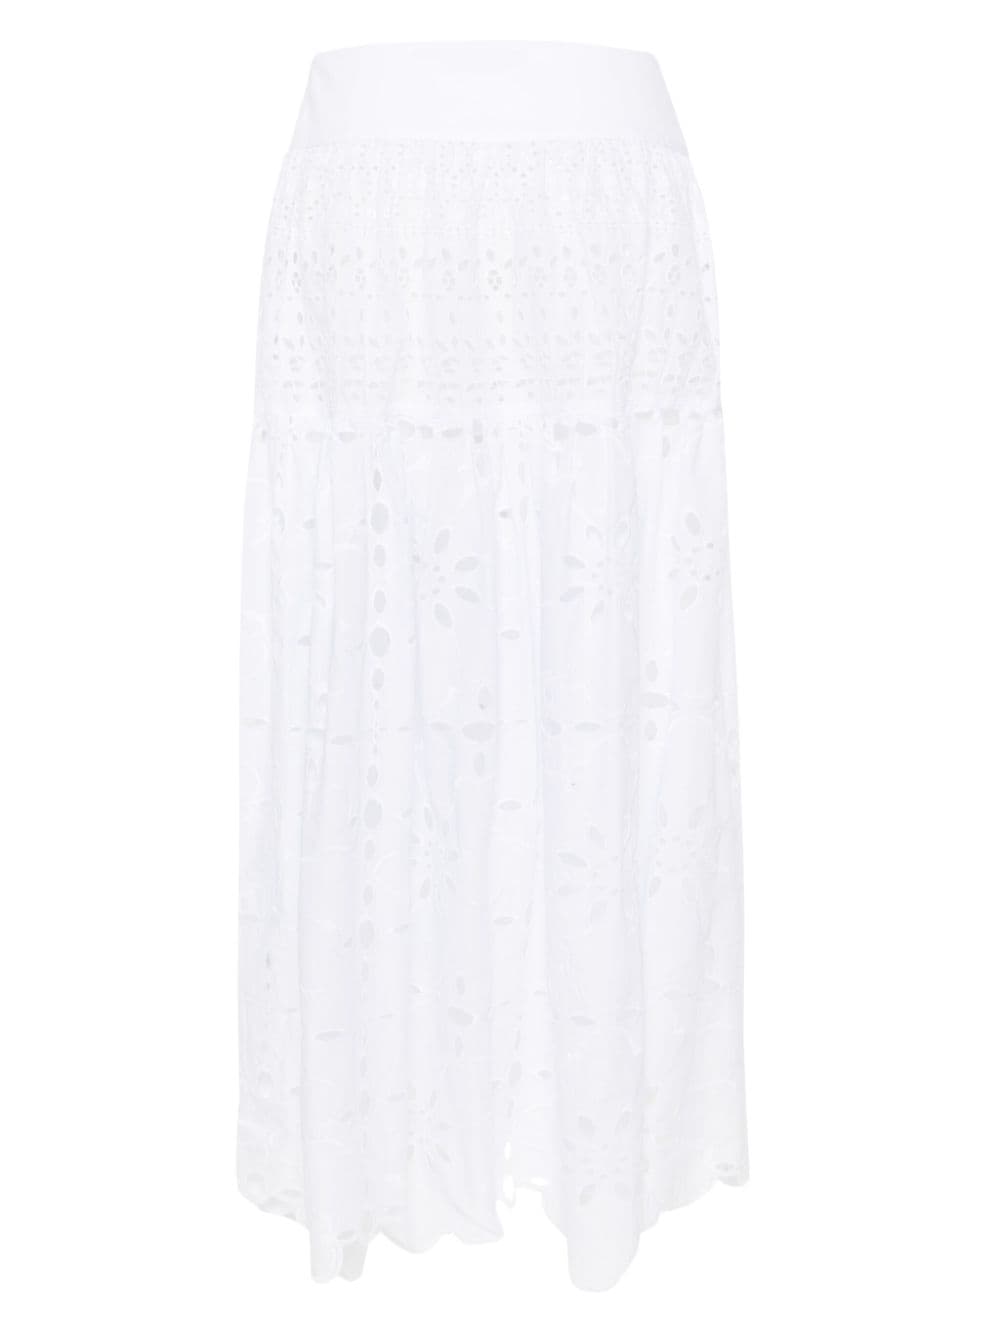 ERMANNO SCERVINO Floral Broderie Anglaise Maxi Skirt for Women